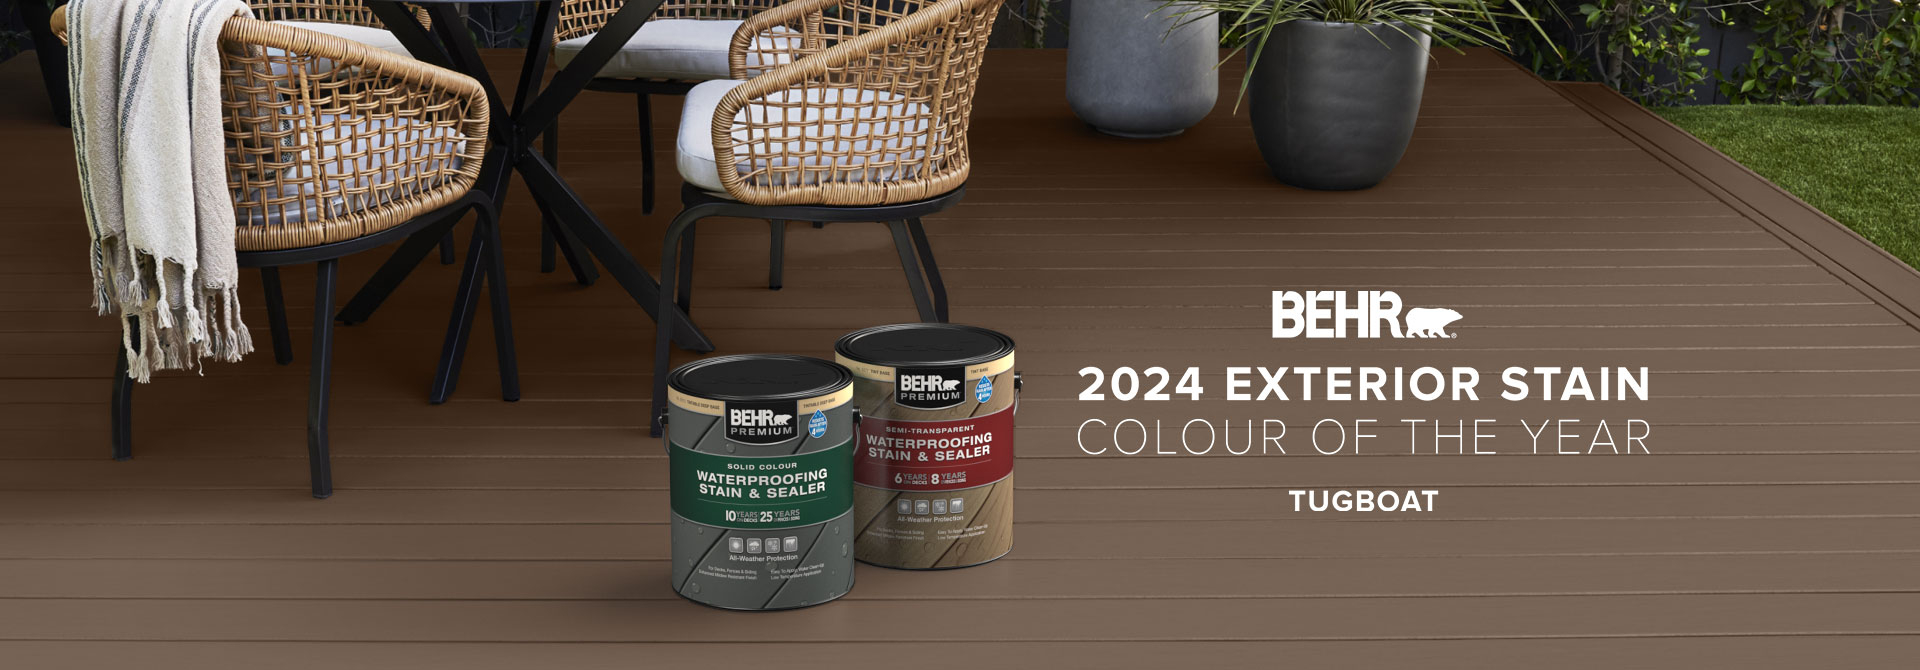 Wooden deck stained in Tugboat, featuring Behr 2024 Colour of the Year, Tugboat